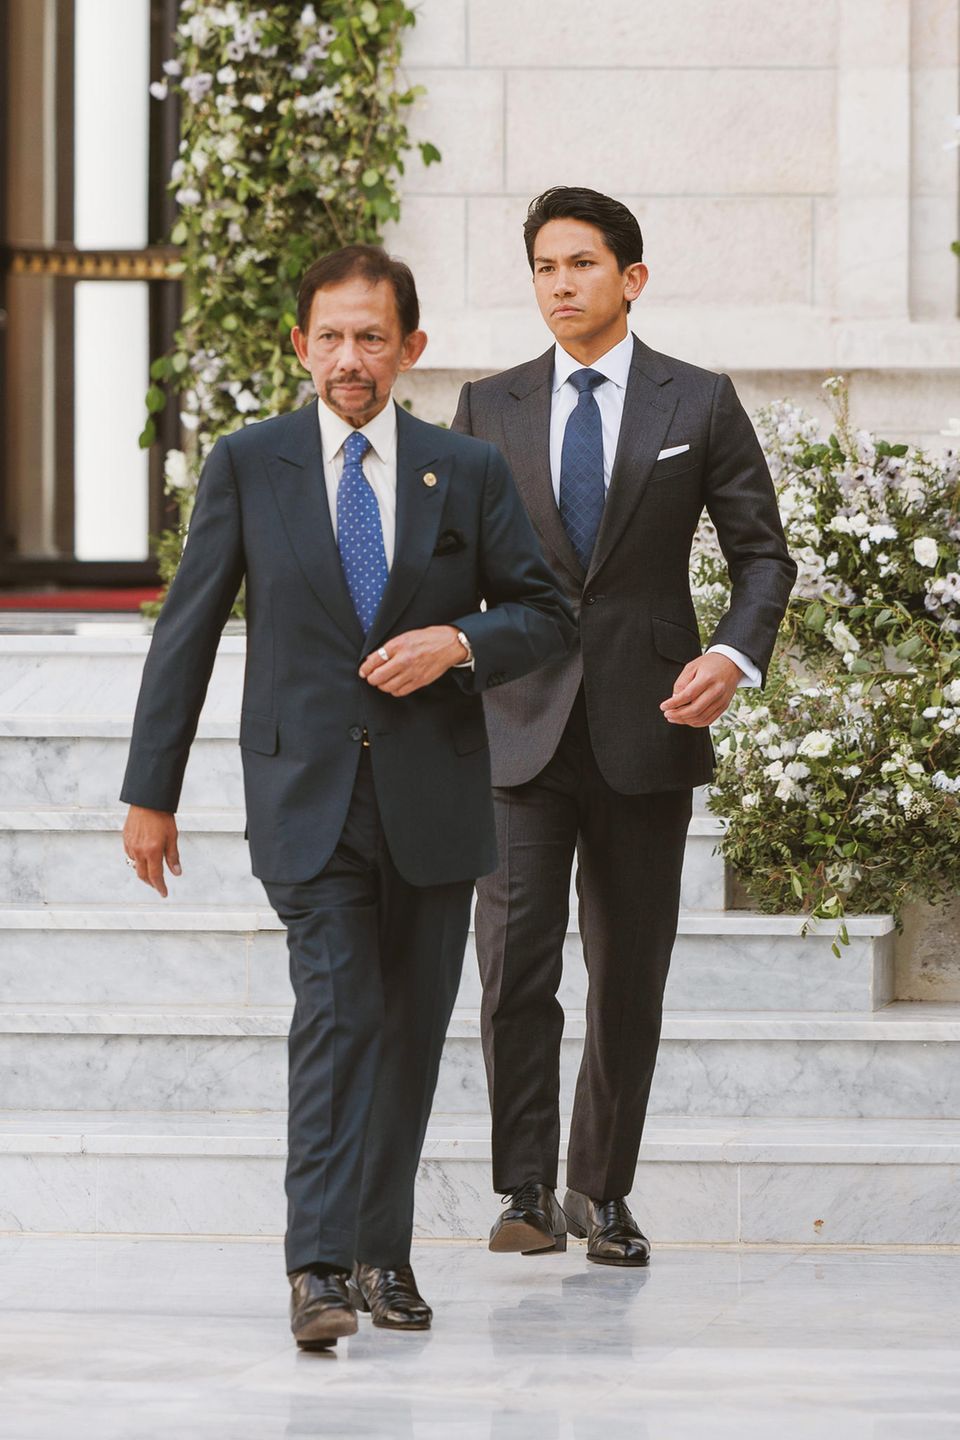 Prince Mateen of Brunei with his father Hassanal Bolkiah, Sultan of Brunei,